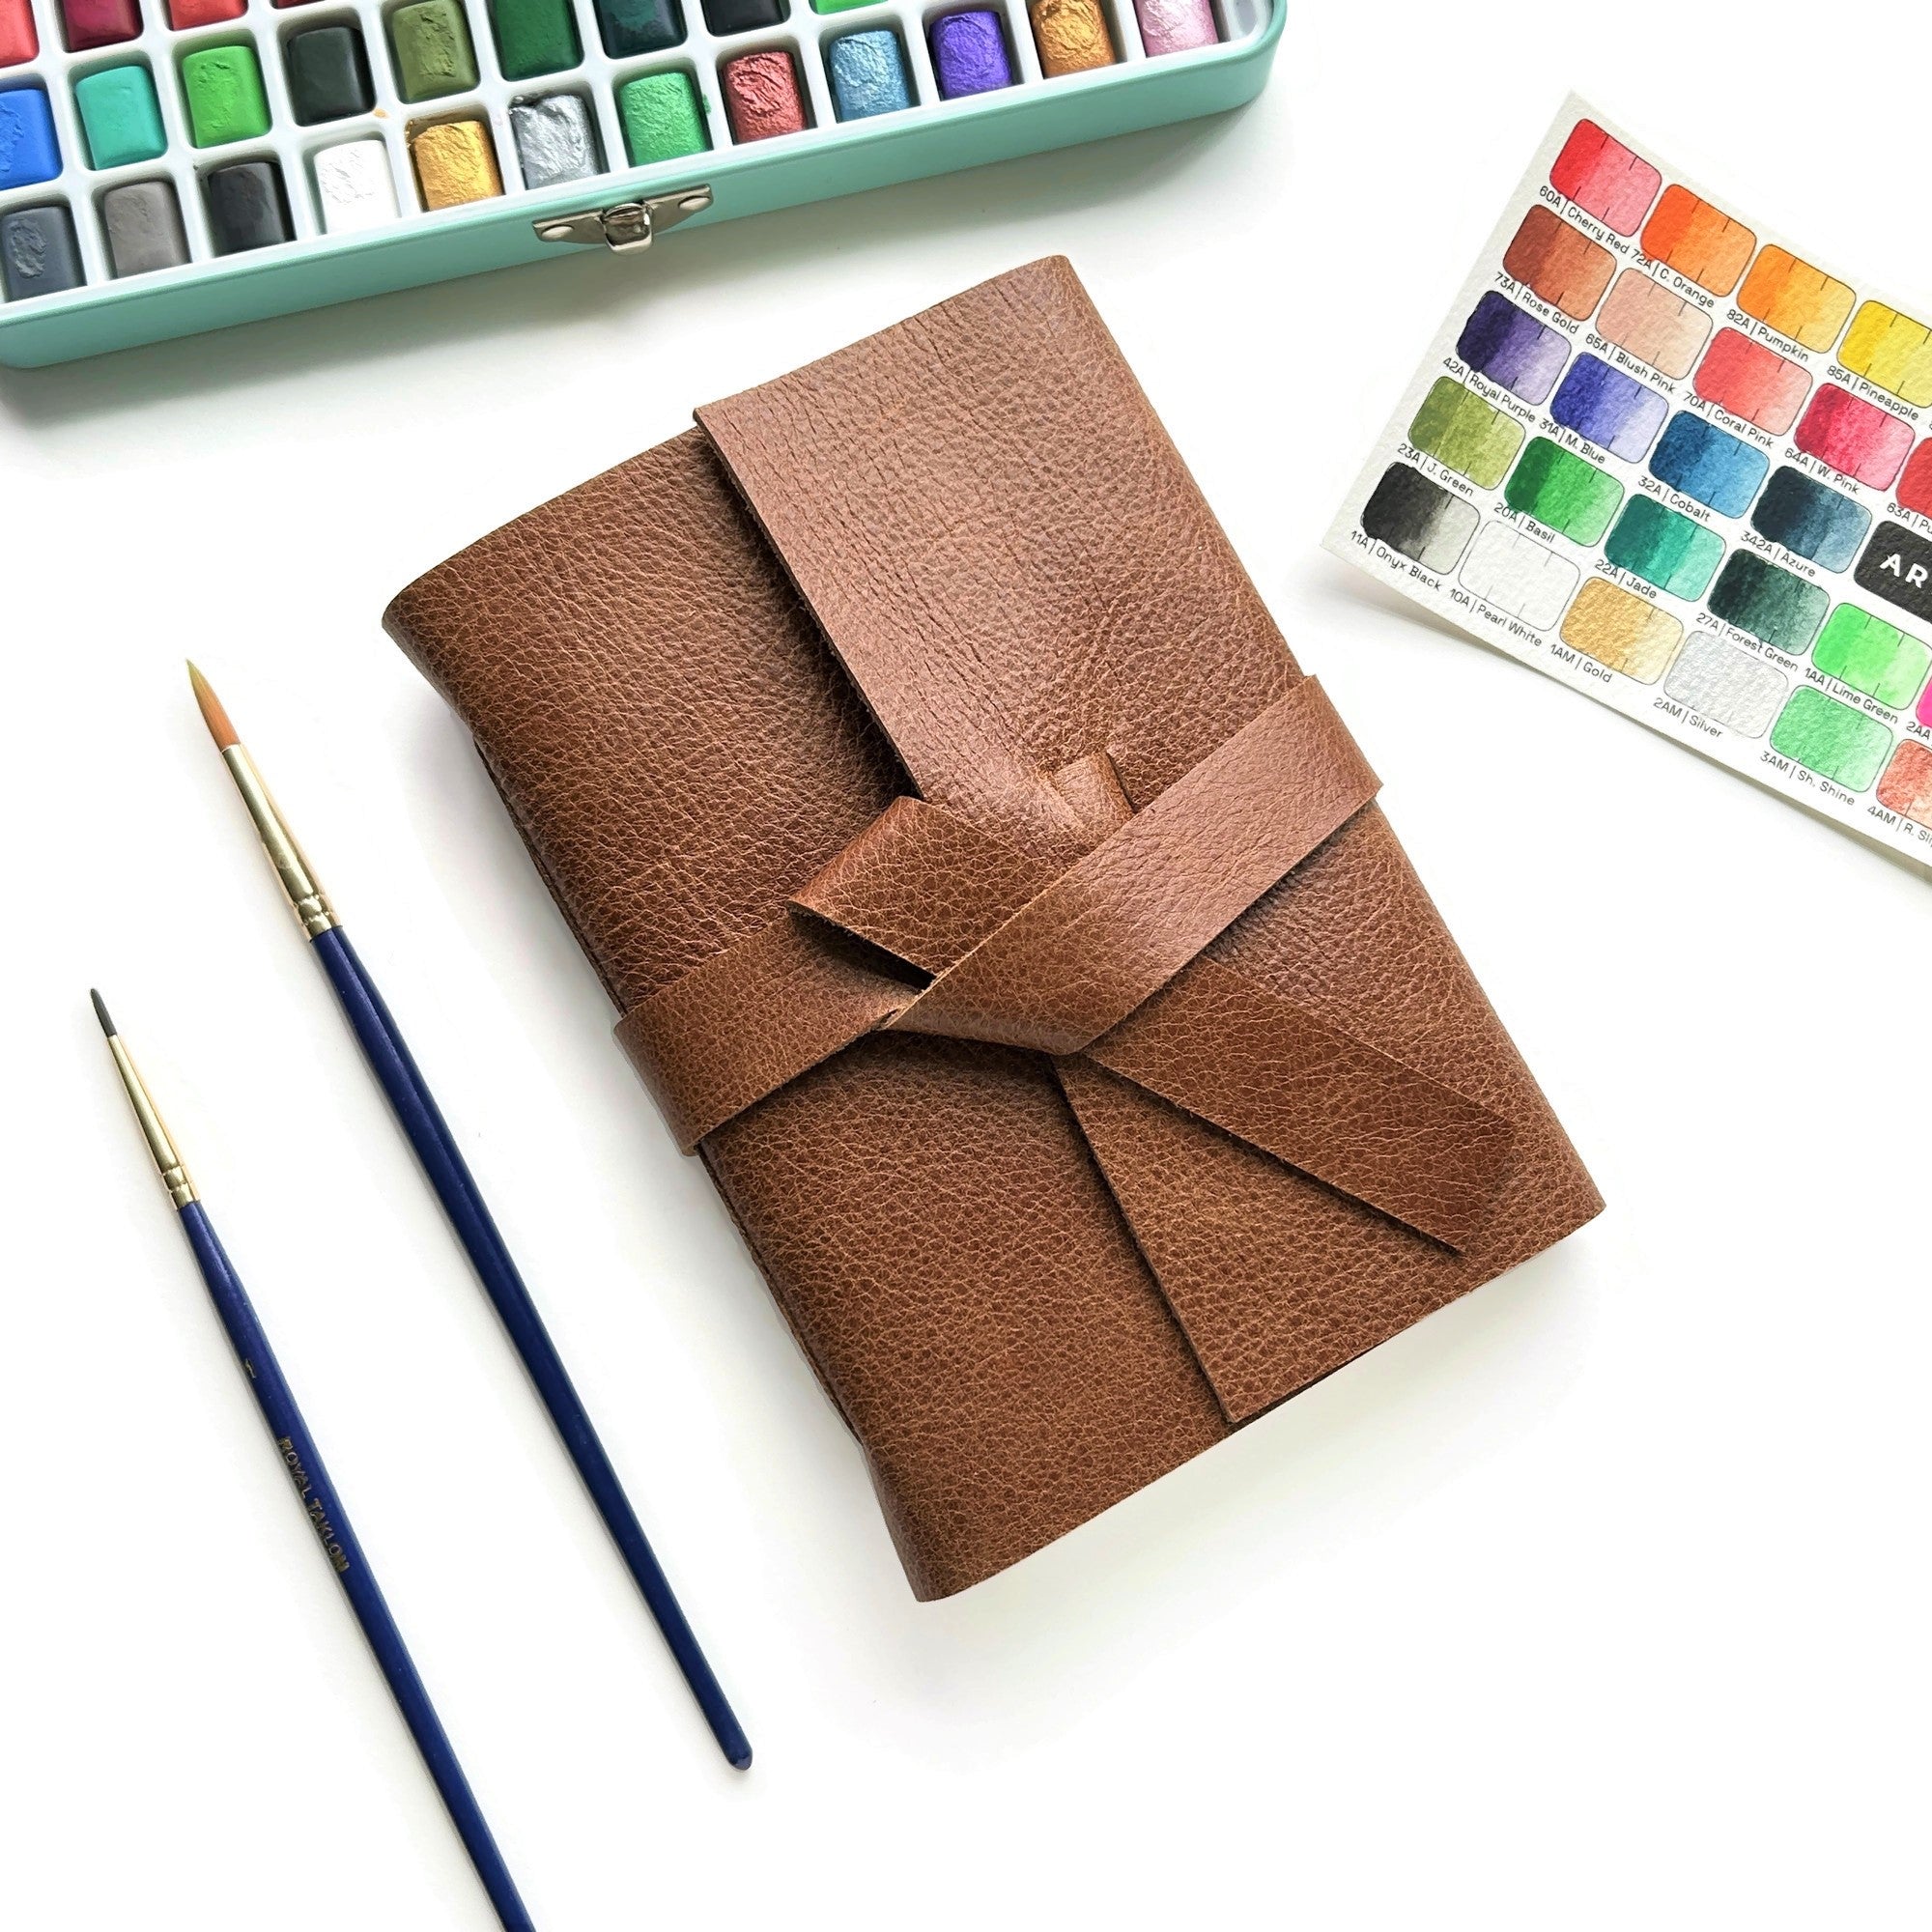 Watercolor Paper Leather Bound Sketchbook, Cold Press 100% Cotton